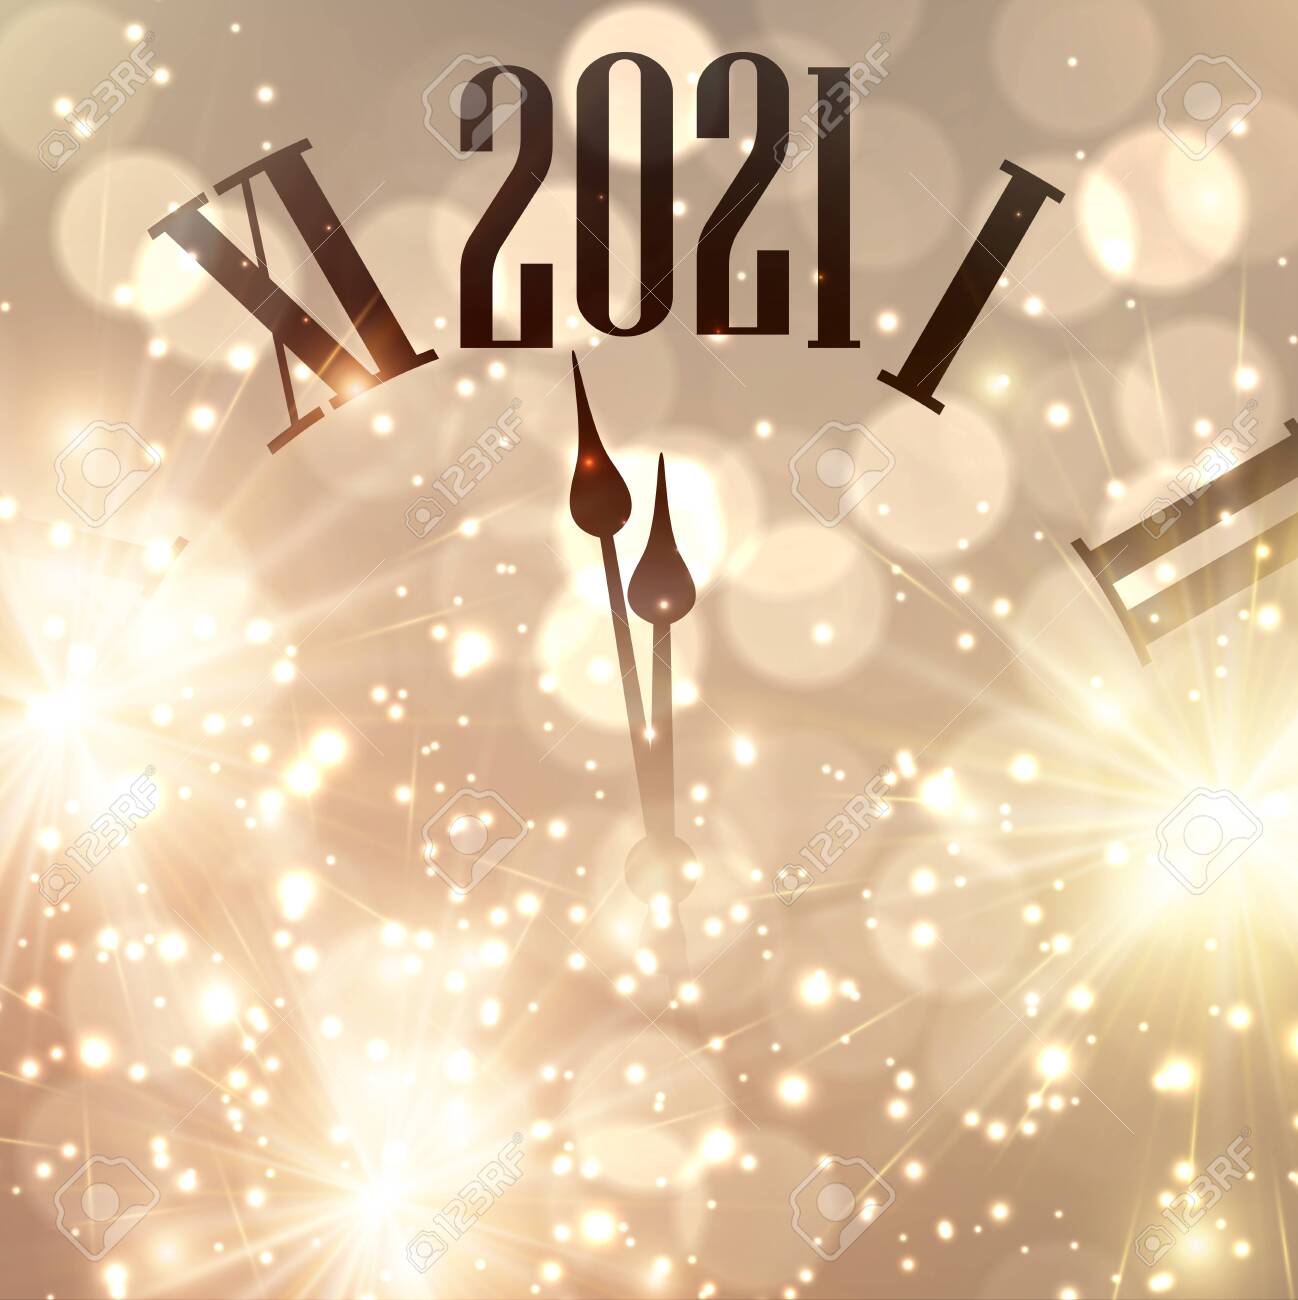 Clock Hands Showing One Minute To 2021 Year Creative Clock On